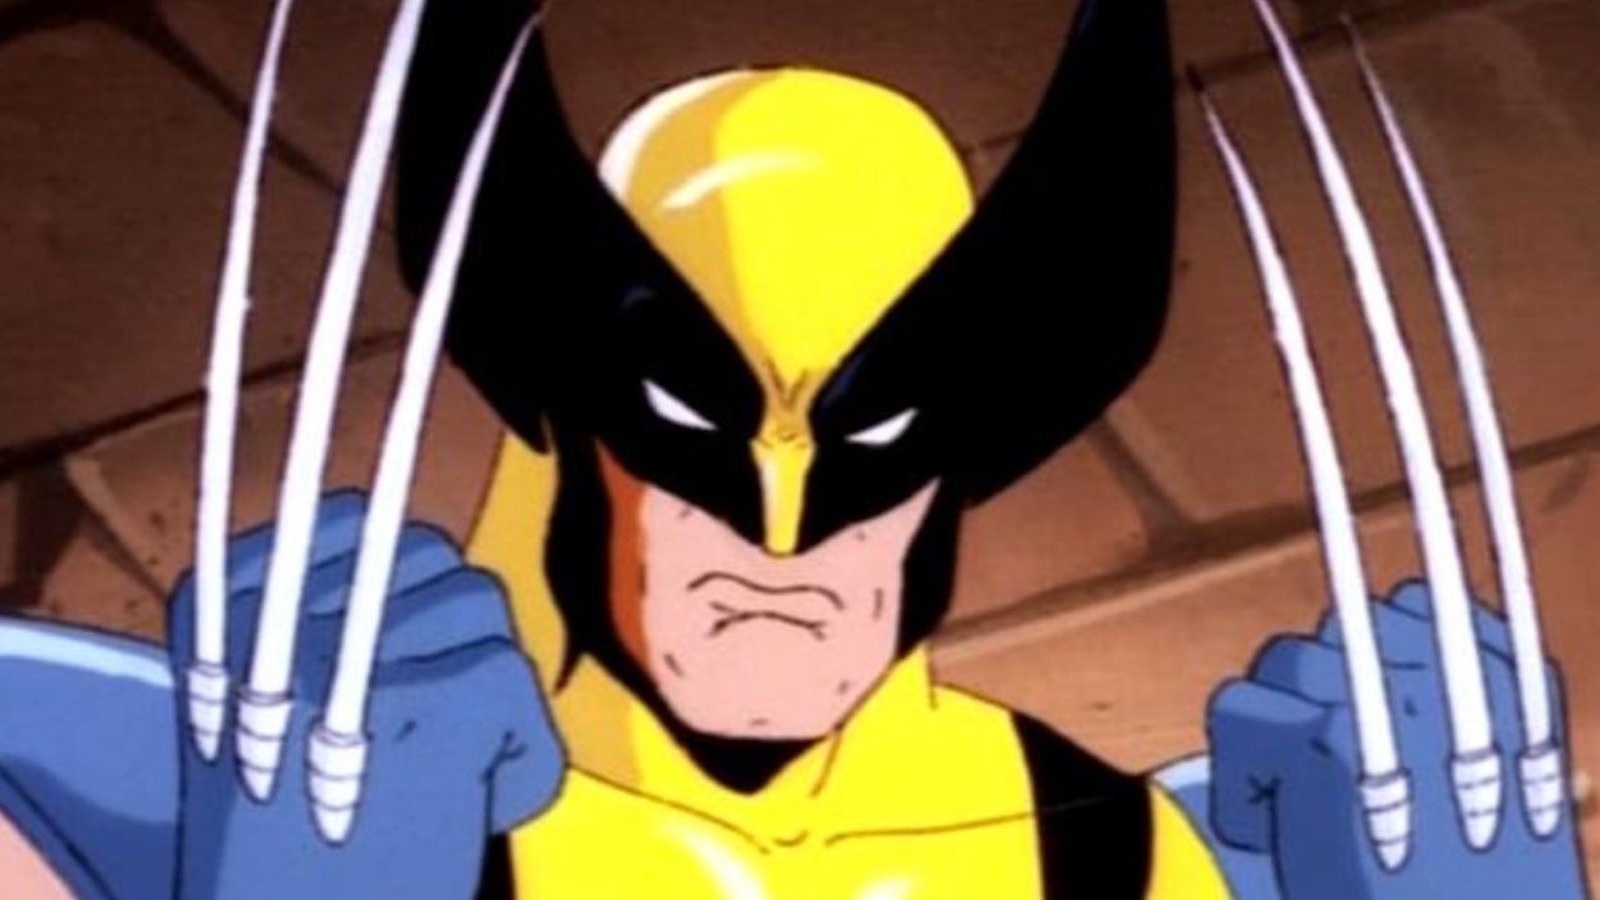 The Best Episodes Of X-Men: The Animated Series, According To IMDb